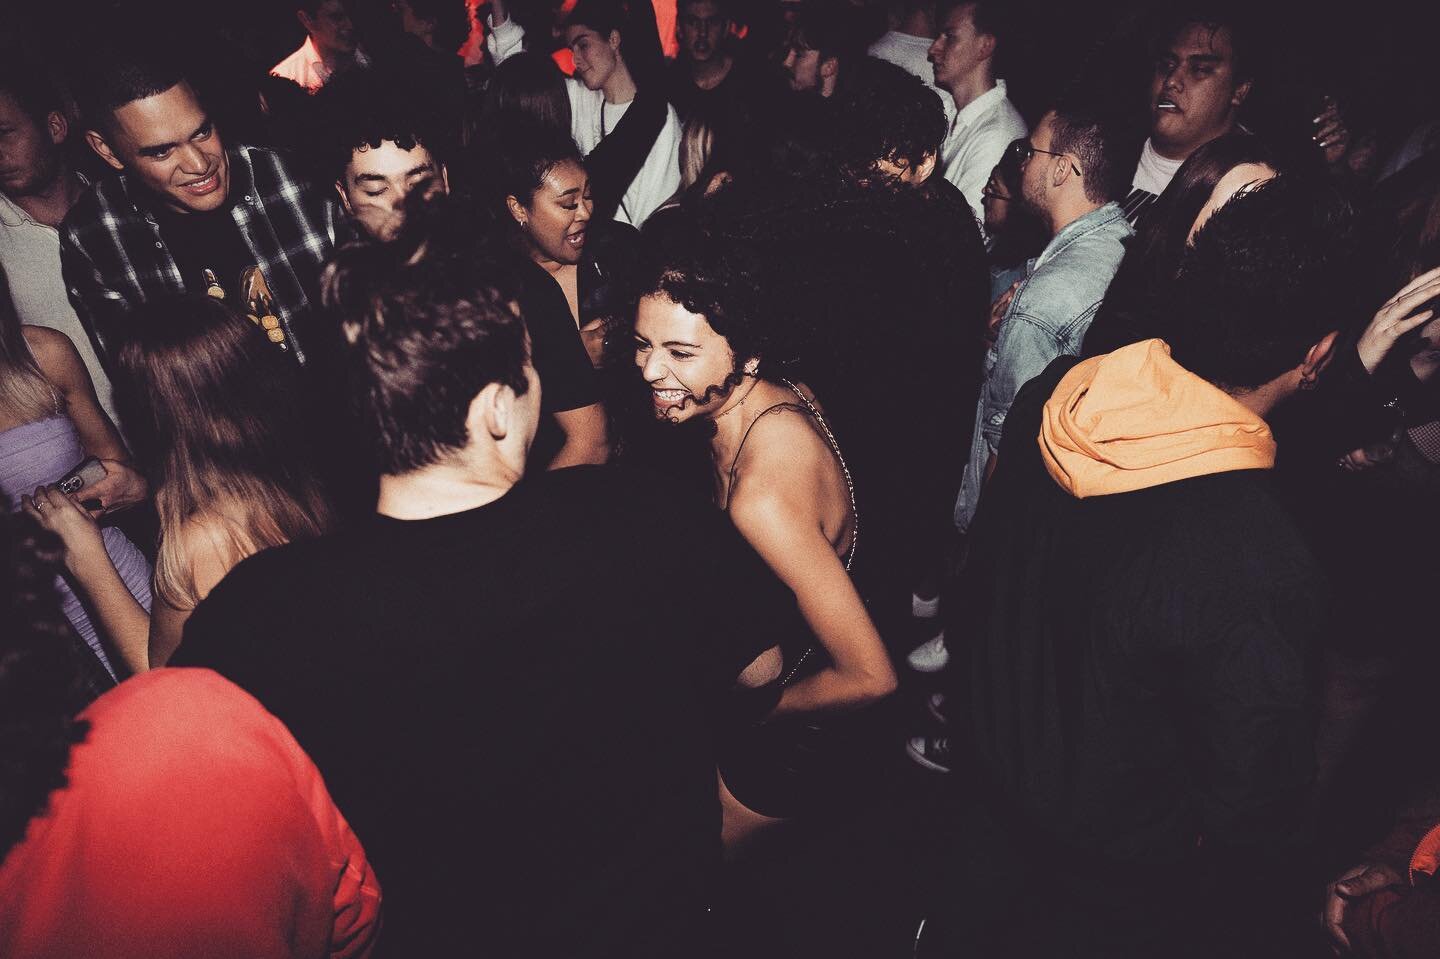 All smiles on the dance floor ☺️ We&rsquo;re back at it from Wednesday with @blocwednesdays 💪🏻